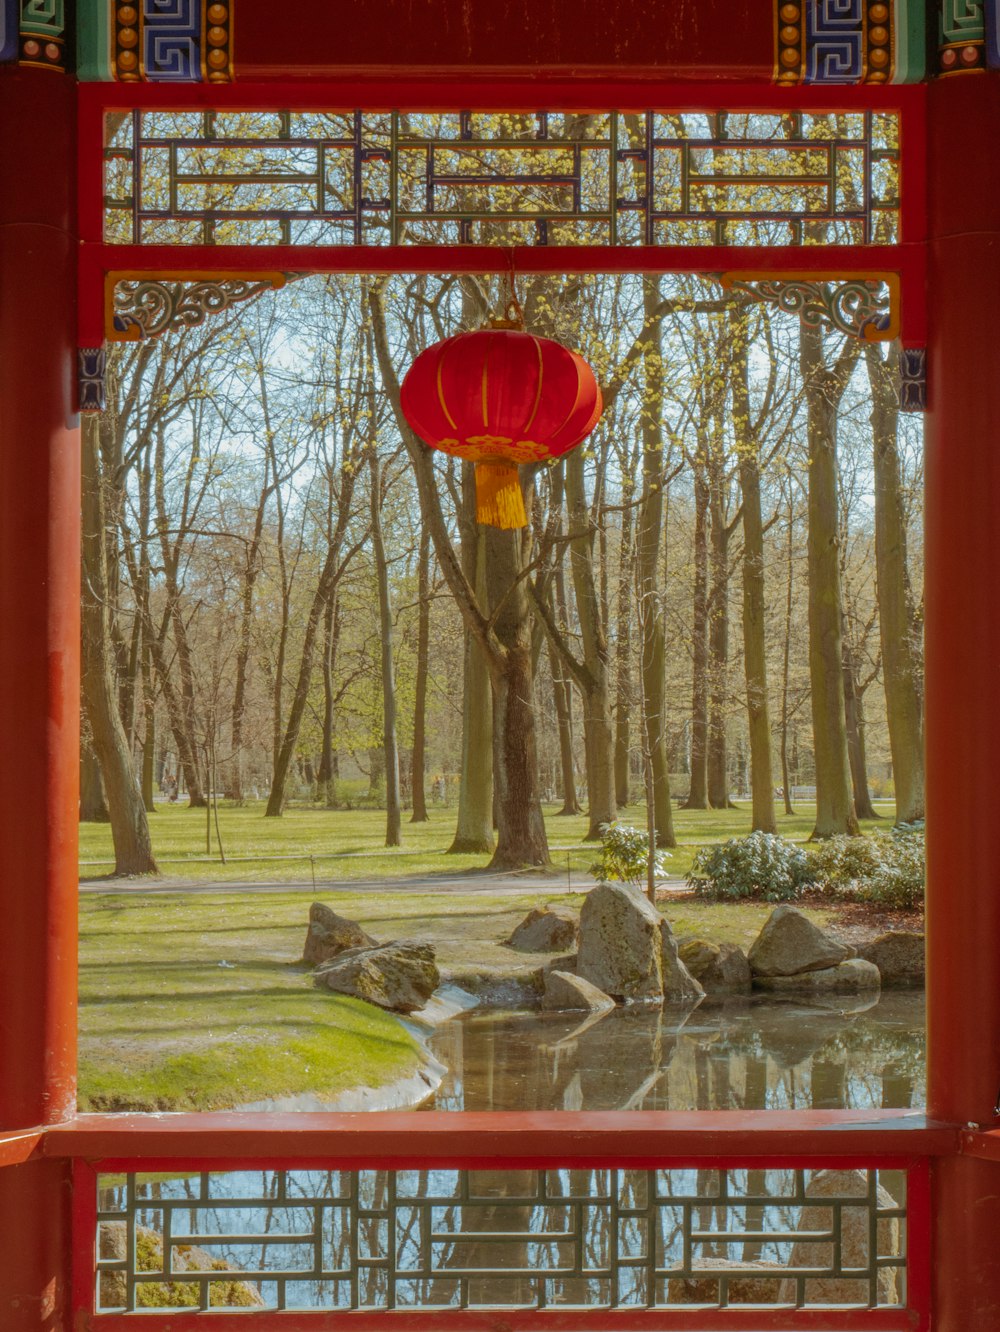 a red lantern hanging over a pond in a park